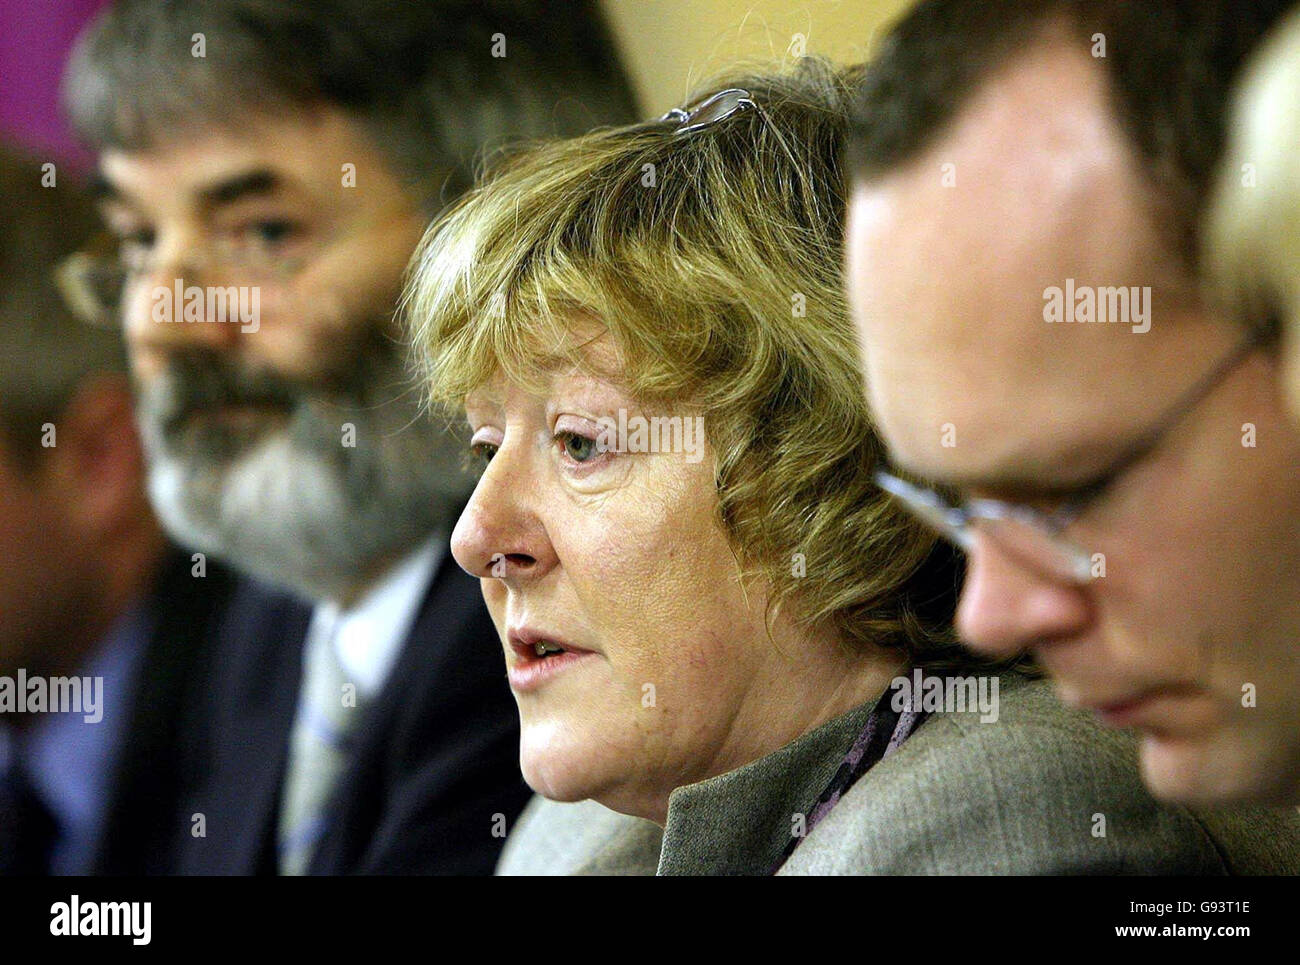 Patricia McKeown (centre), Vice President of thr Irish Congress of Trade Unions chairs a discussion on the controversial EU Services Directive in Dublin, Friday January 27, 2006 See PA story POLITICS Directive. PRESS ASSOCIATION Photo. Photo credit should read: Niall Carson/PA Stock Photo